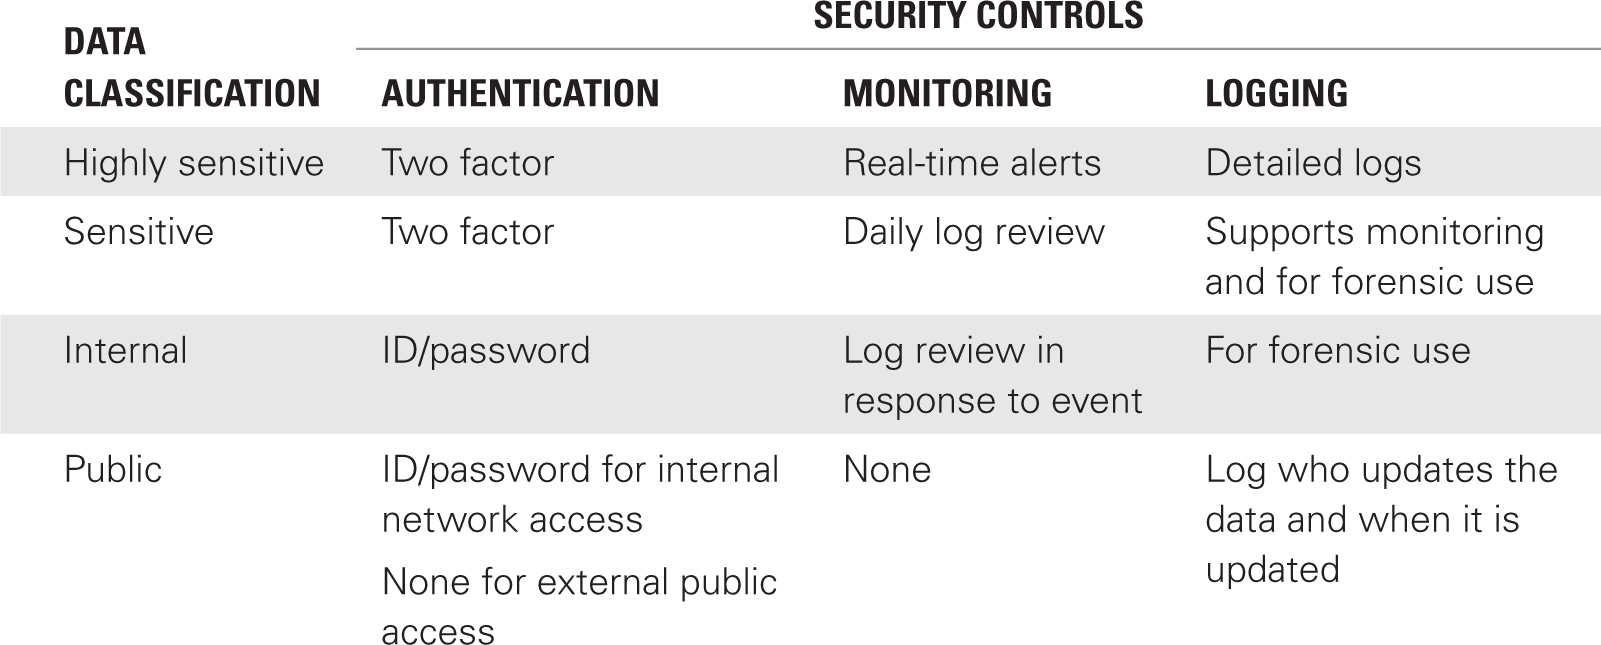 A table depicts the link between the data classifications and the security controls.